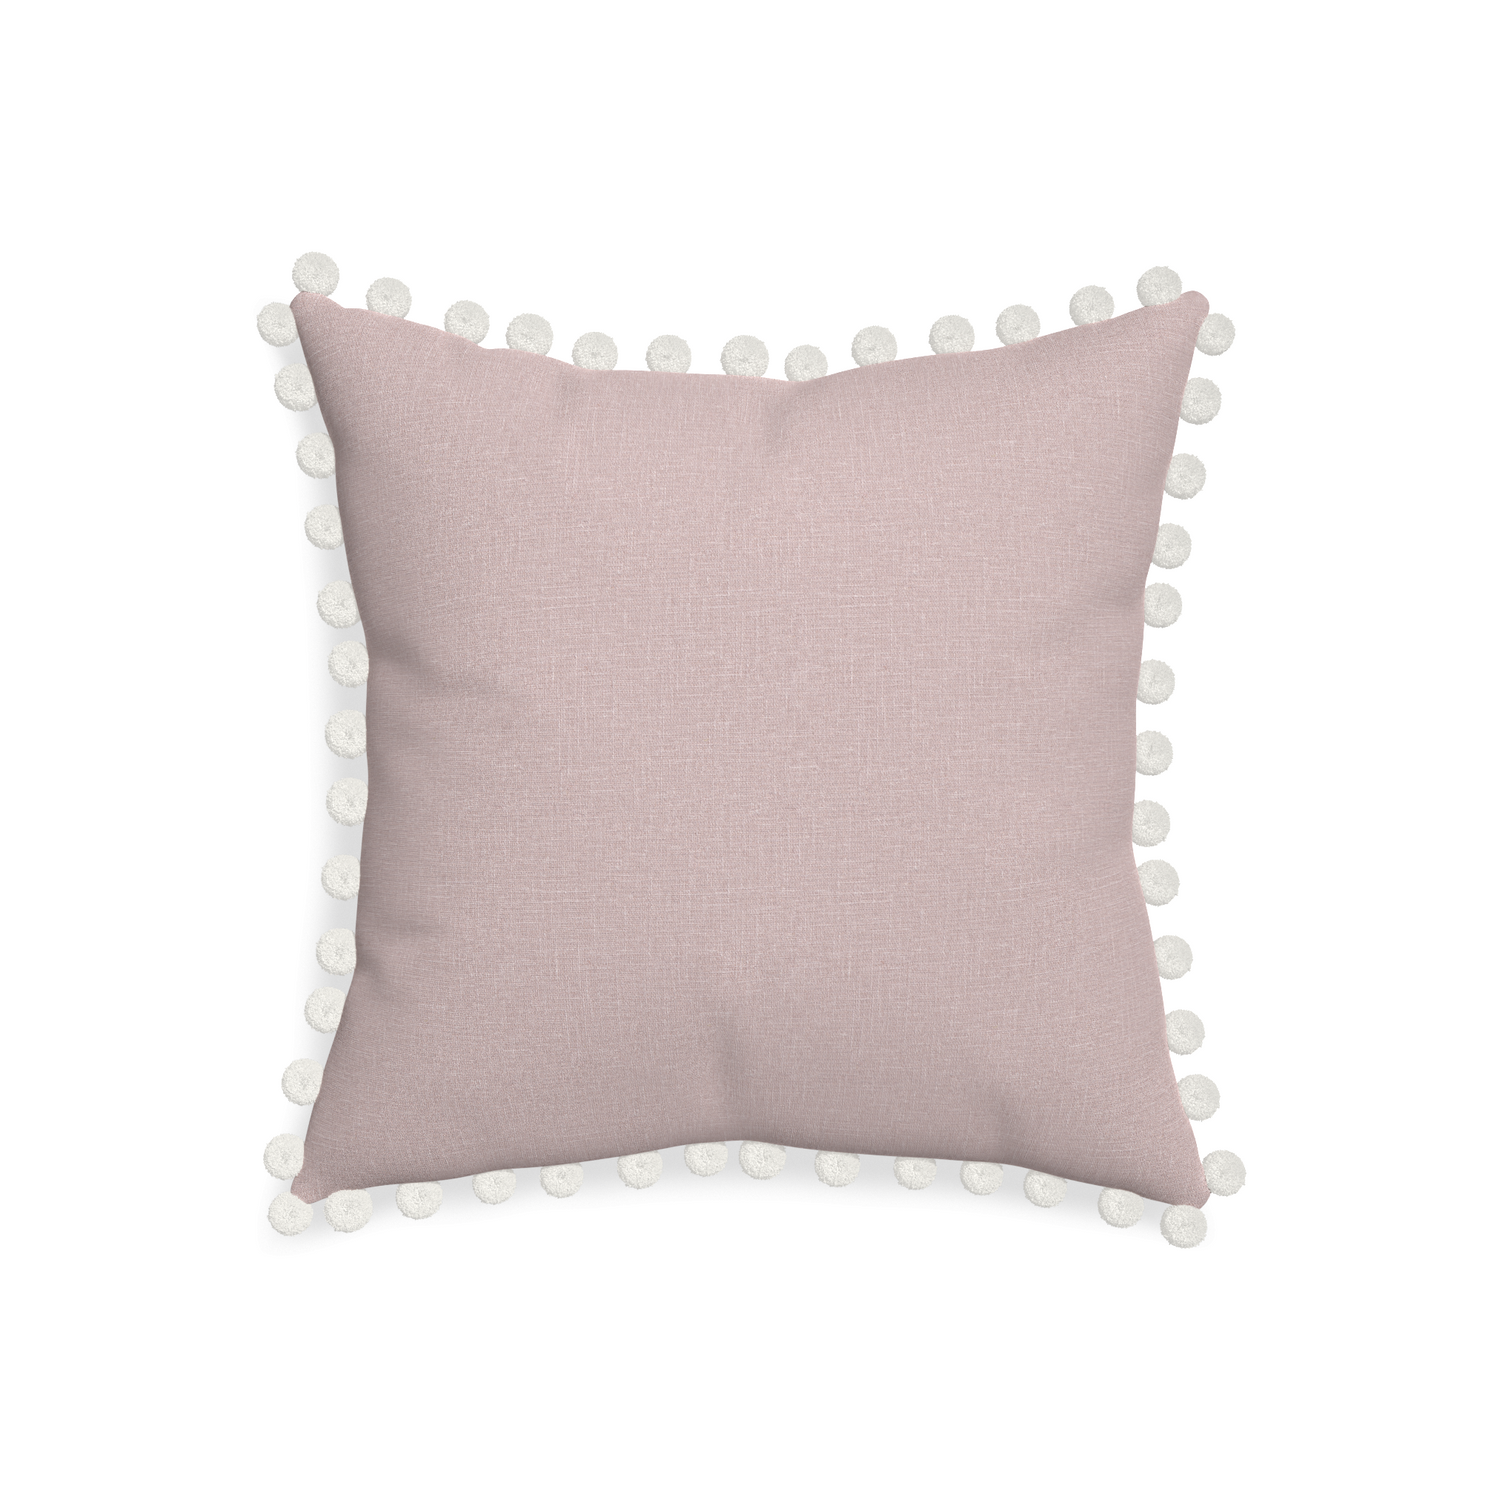 20-square orchid custom mauve pinkpillow with snow pom pom on white background